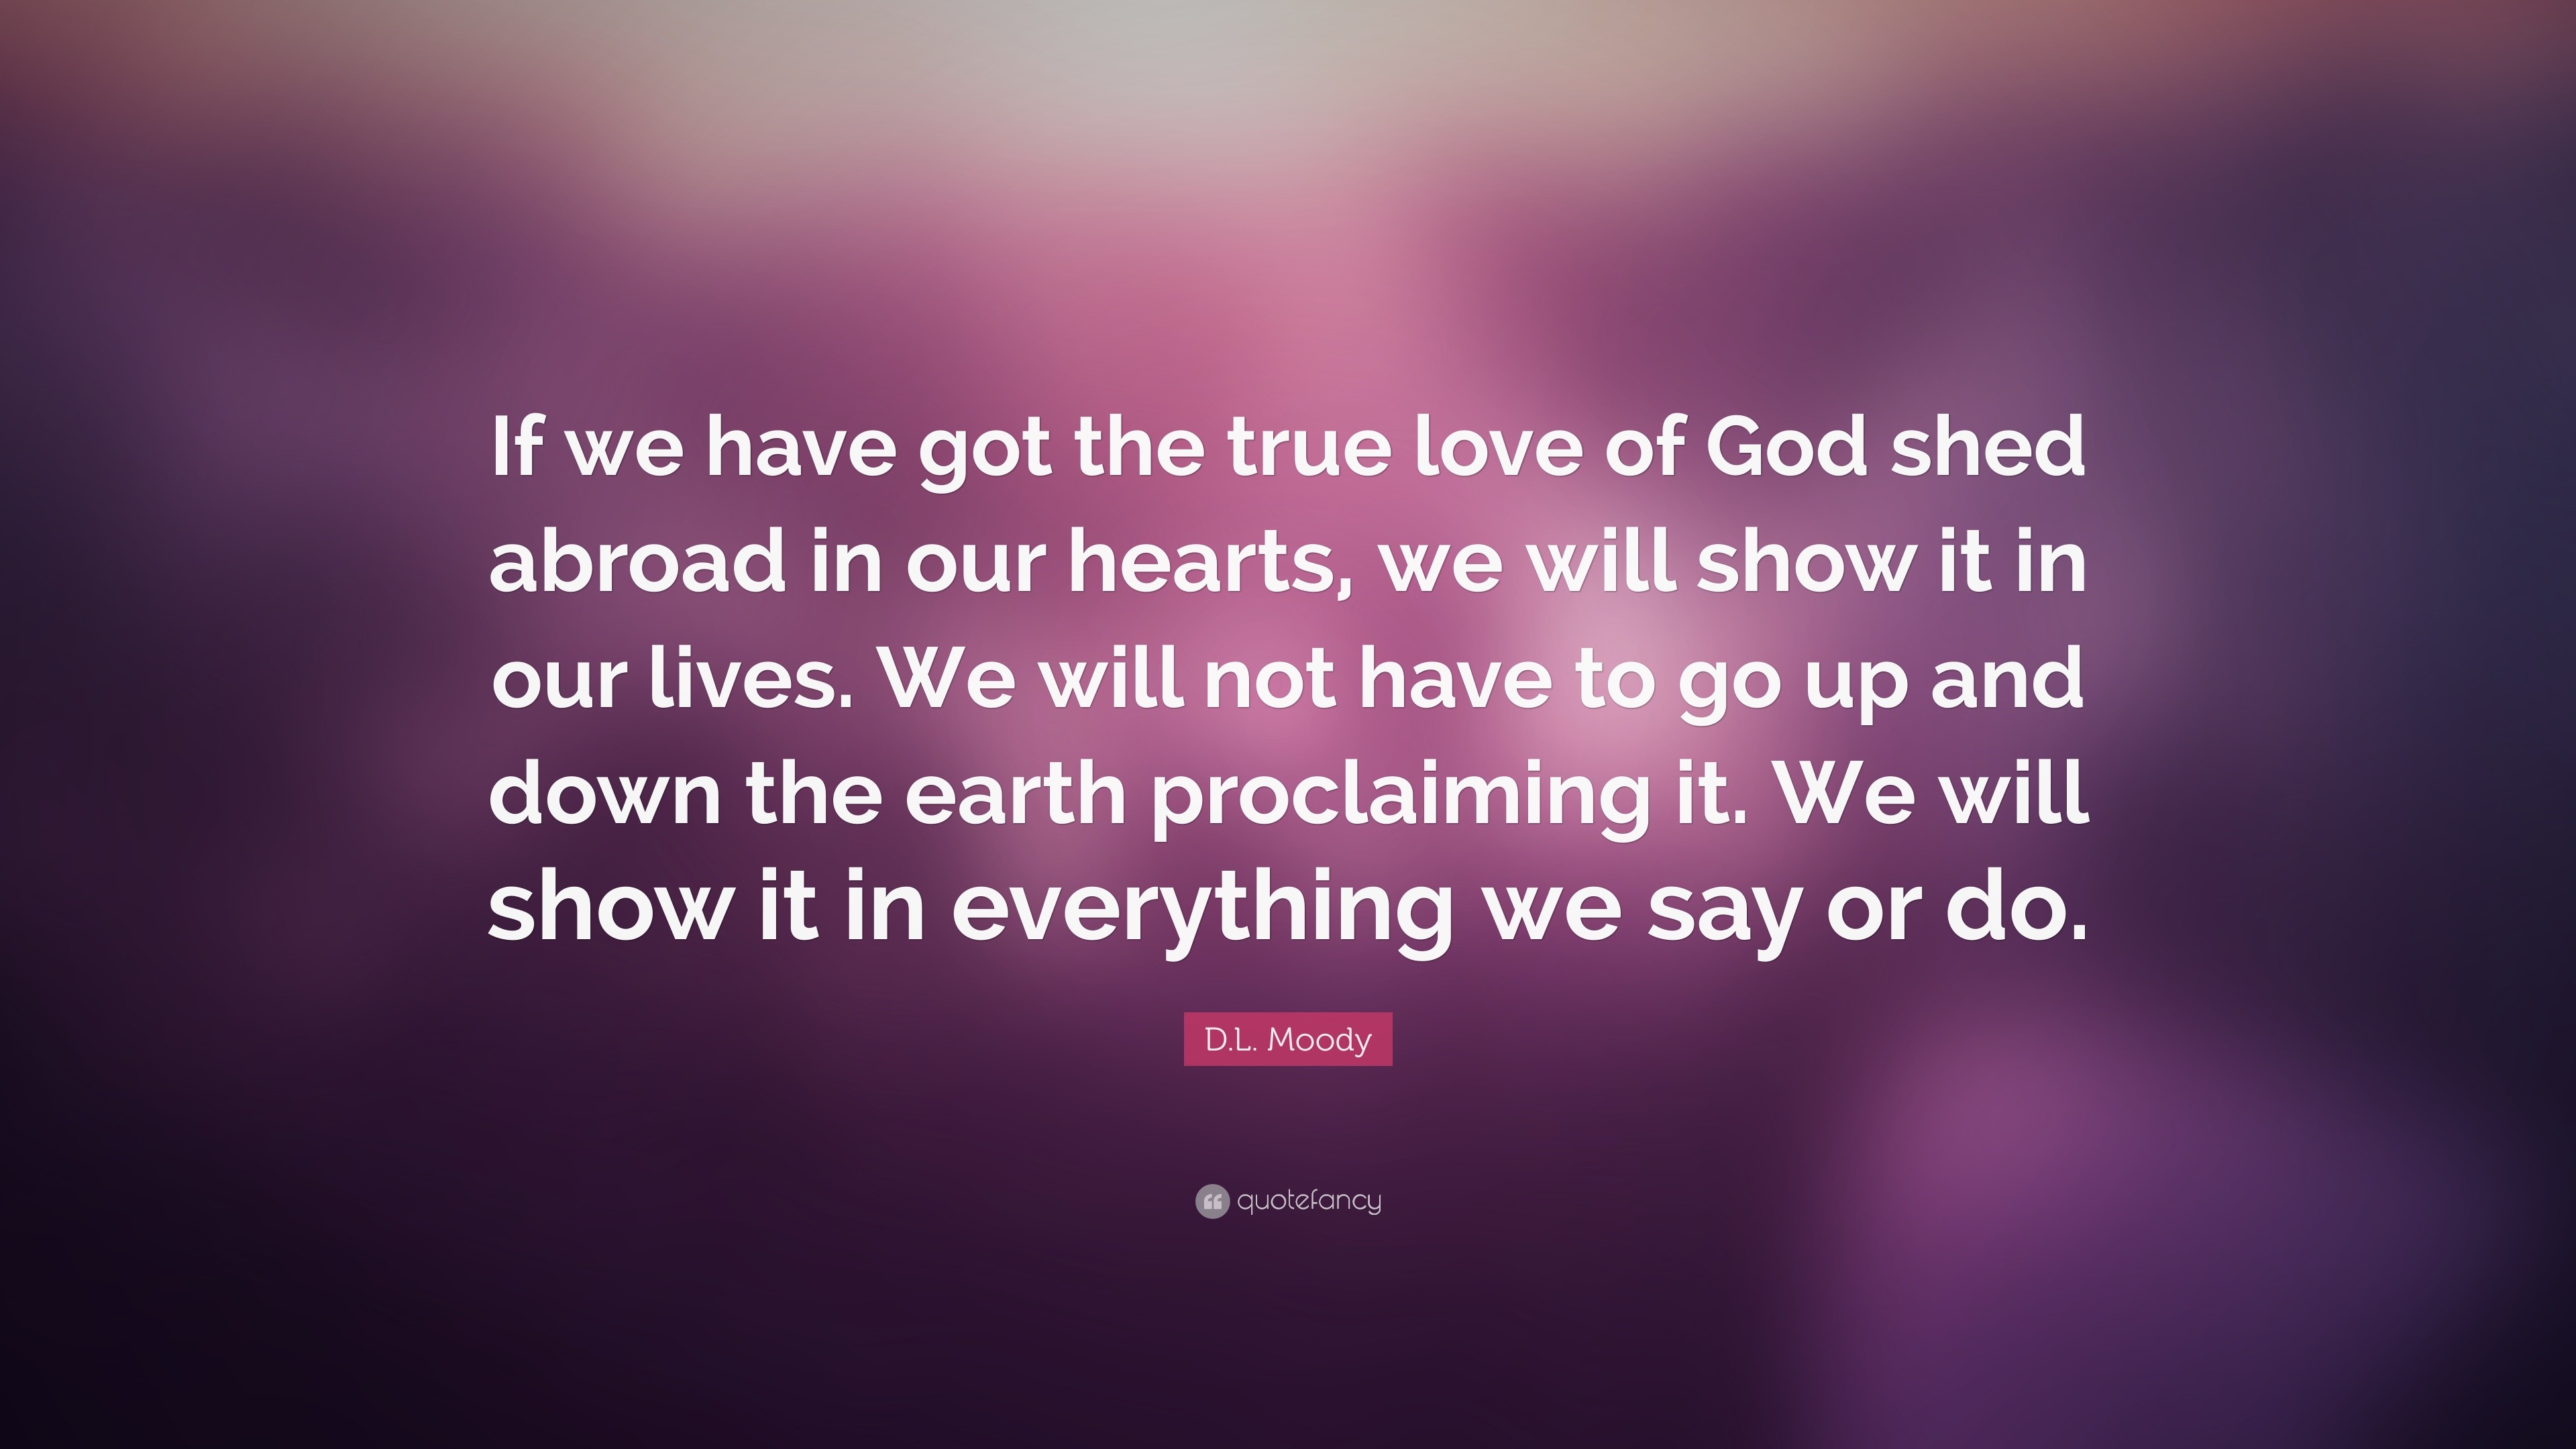 D L Moody Quote “If we have got the true love of God shed abroad